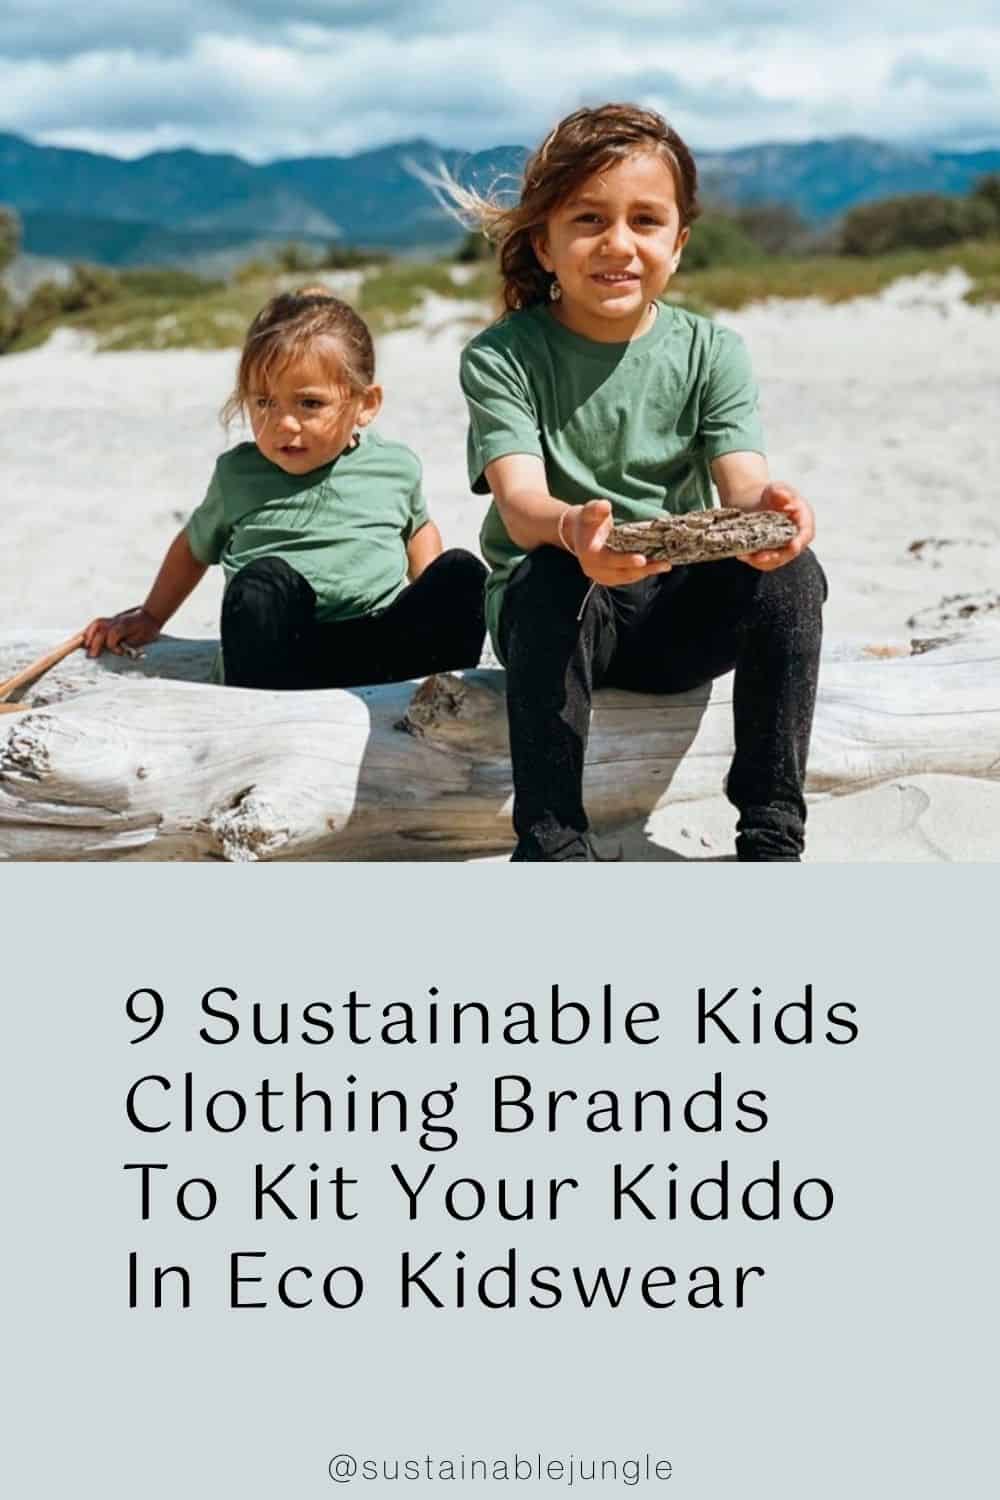 9 Sustainable Kids Clothing Brands To Kit Your Kiddo In Eco Kidswear Image by Pact #sustainablekidsclothing #sustainableclothingforkids #sustainablekidsclothes #ethicalkidsclothing #ethicalkidsclothes #sustainablekidswear #sustainablejungle